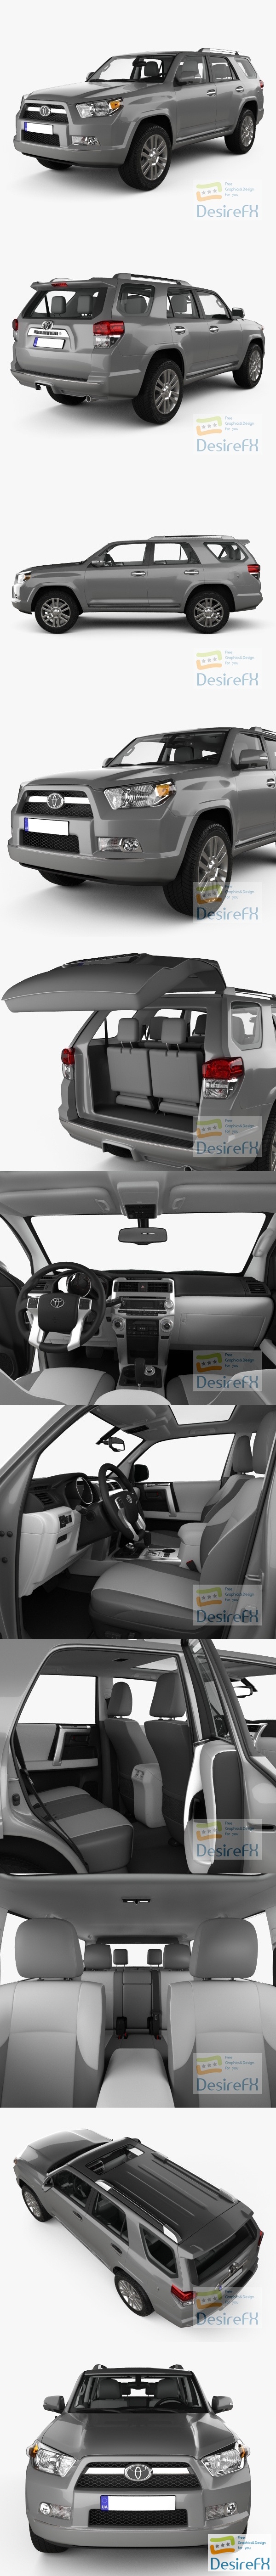 Toyota 4Runner with HQ interior 2011 3D Model